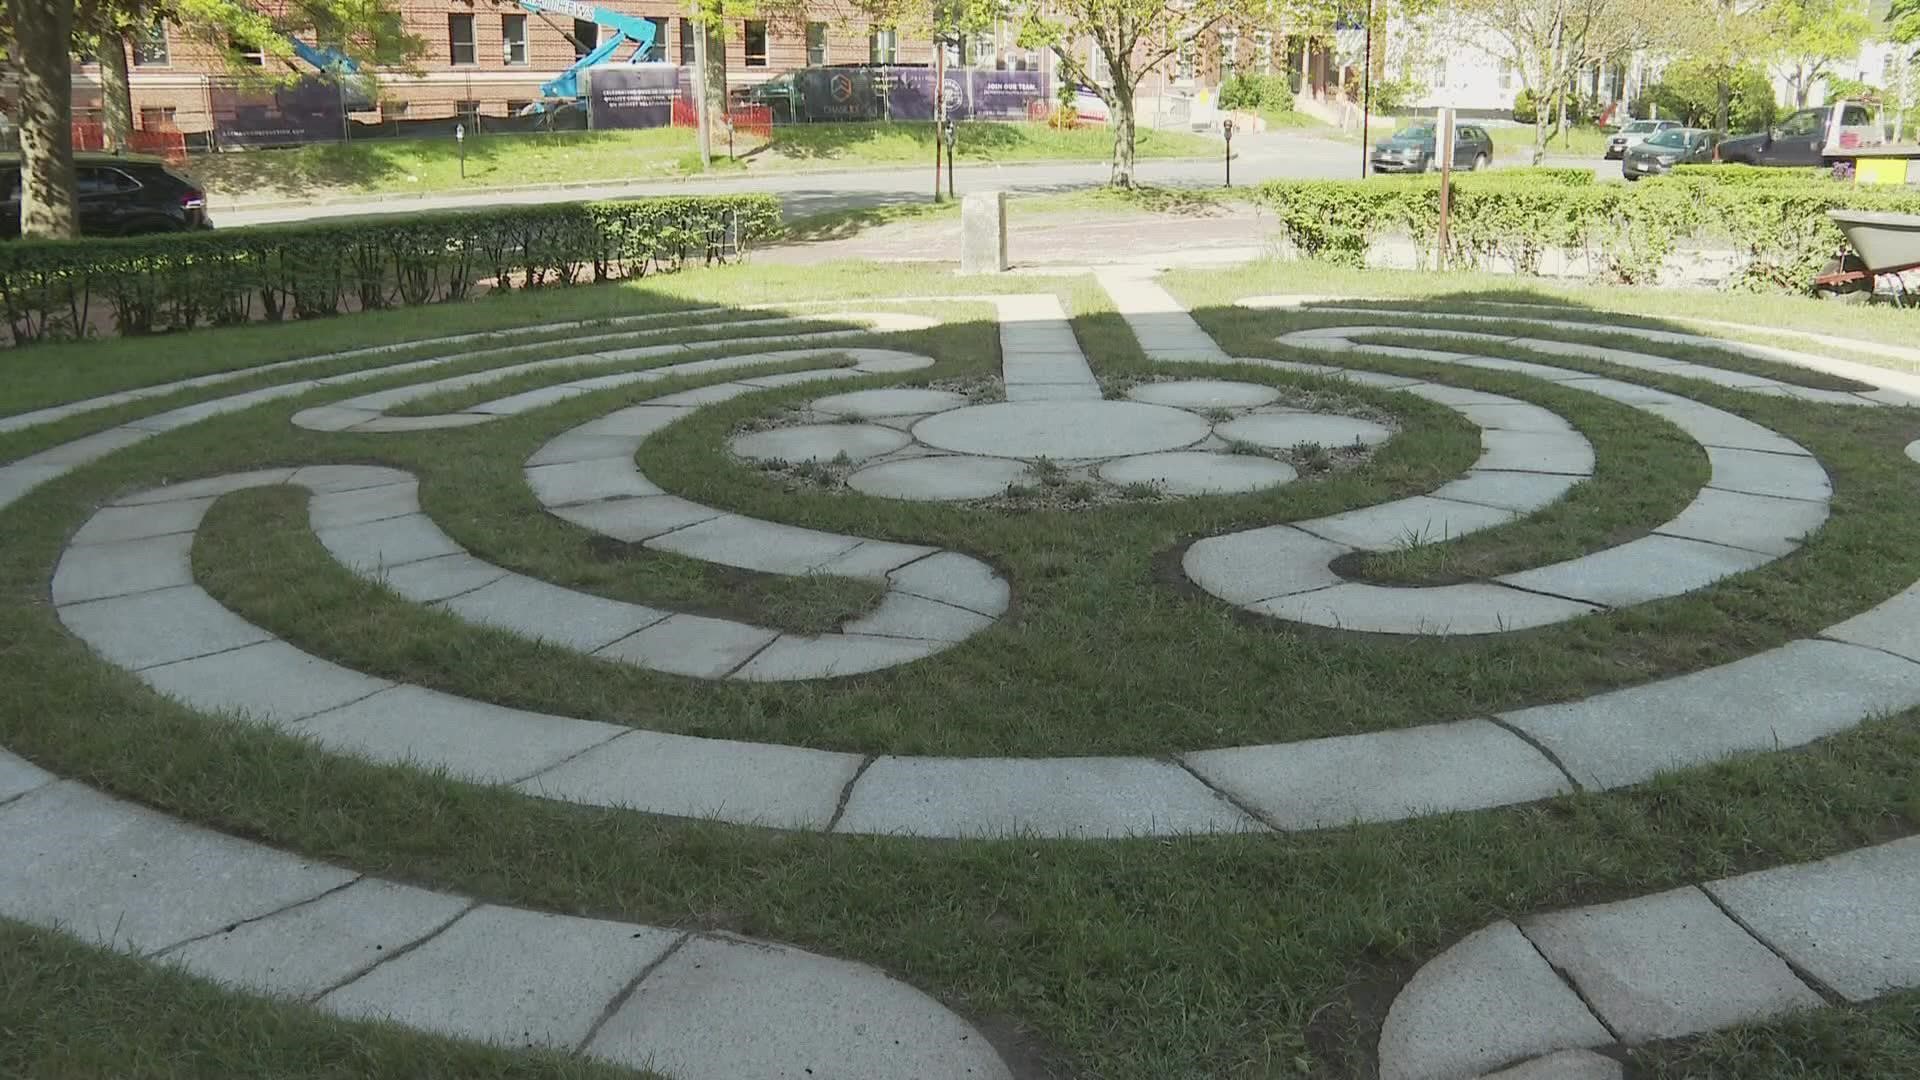 According to the Labyrinth Society, there are more than 250 labyrinths in New England.